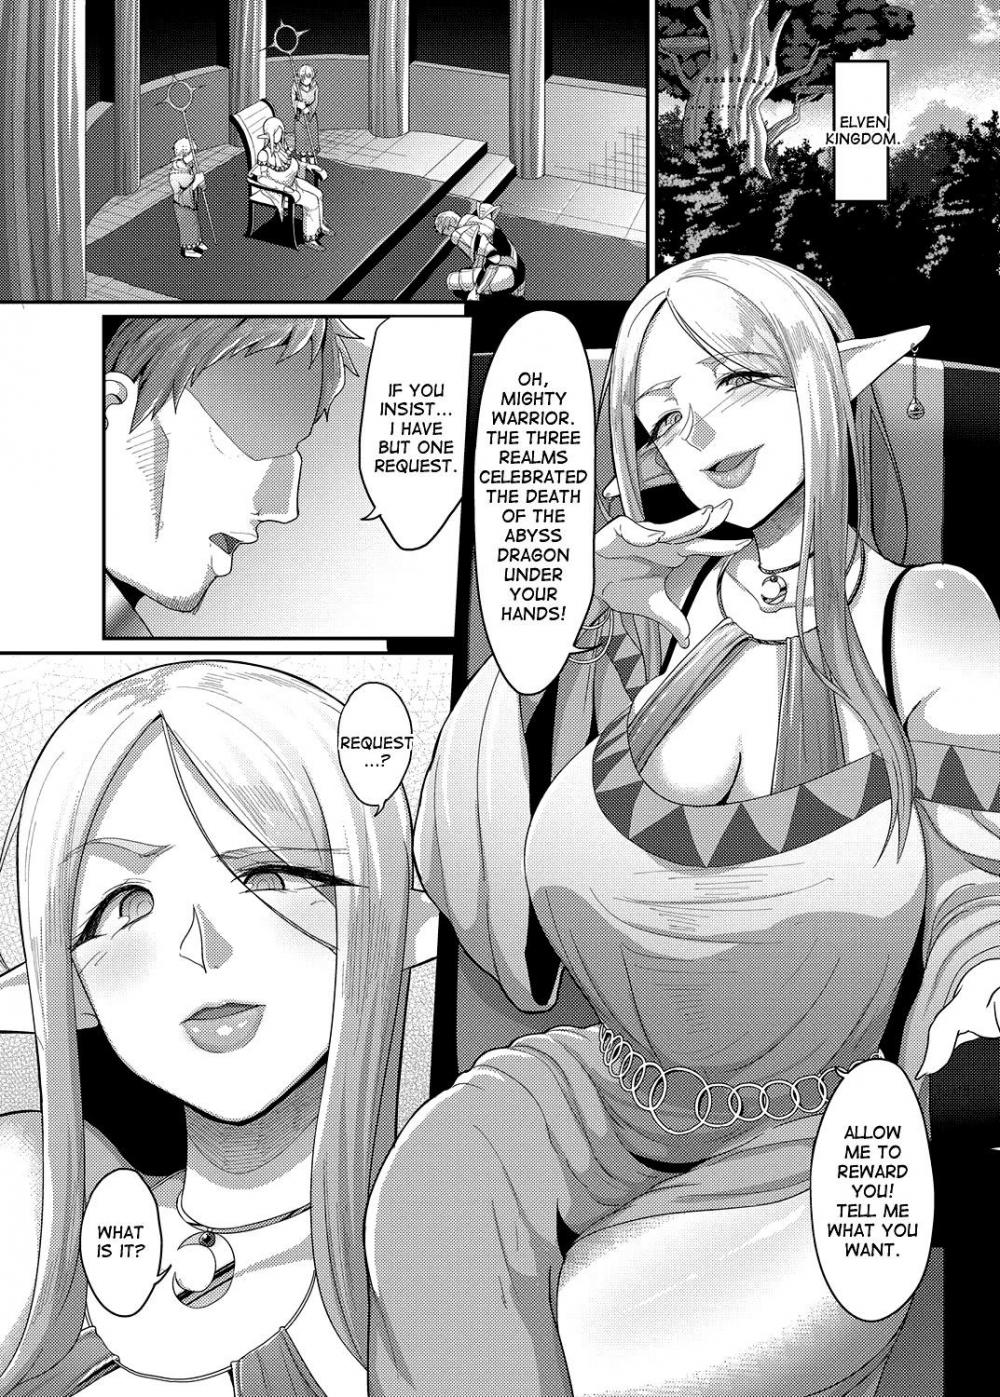 Hentai Manga Comic-Force Married With A Haughty Elf!!-Chapter 1-3